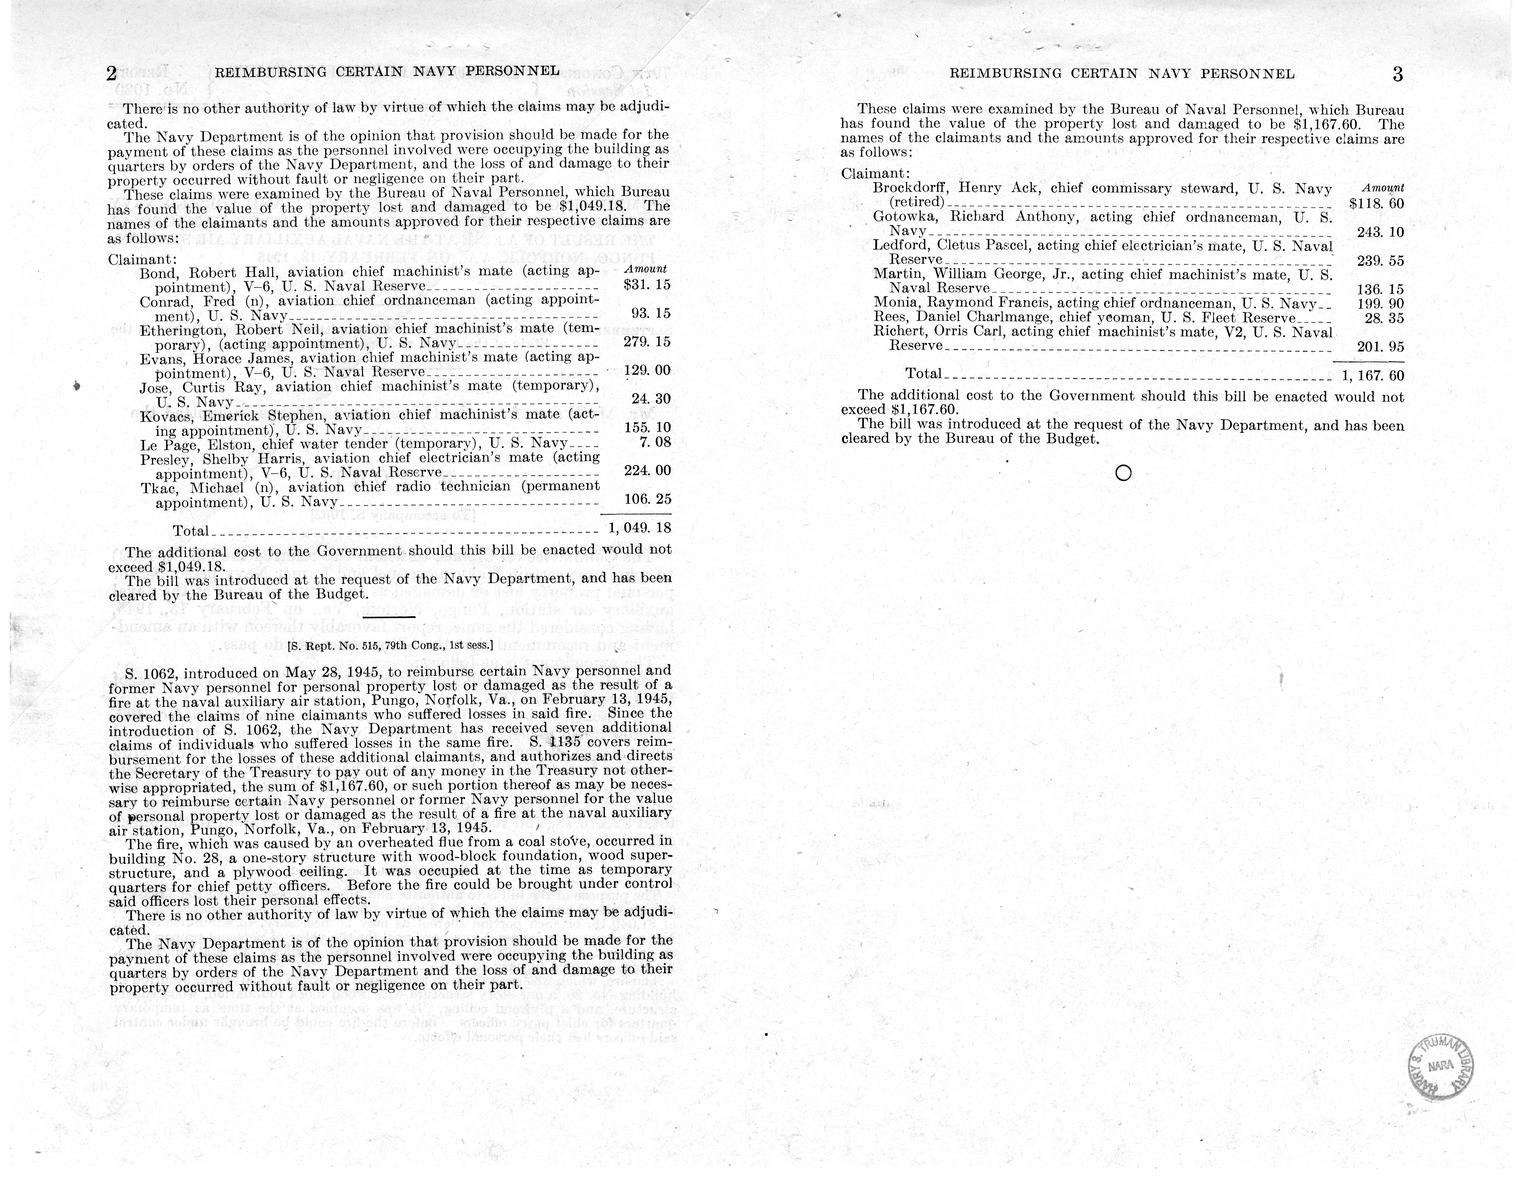 Memorandum from Frederick J. Bailey to M. C. Latta, S. 1062, To Reimburse Certain Navy Personnel and Former Navy Personnel for Personal Property Lost or Damaged as the Result of a Fire at the Naval Auxiliary Air Station, Pungo, Norfolk, Virginia, on Febru